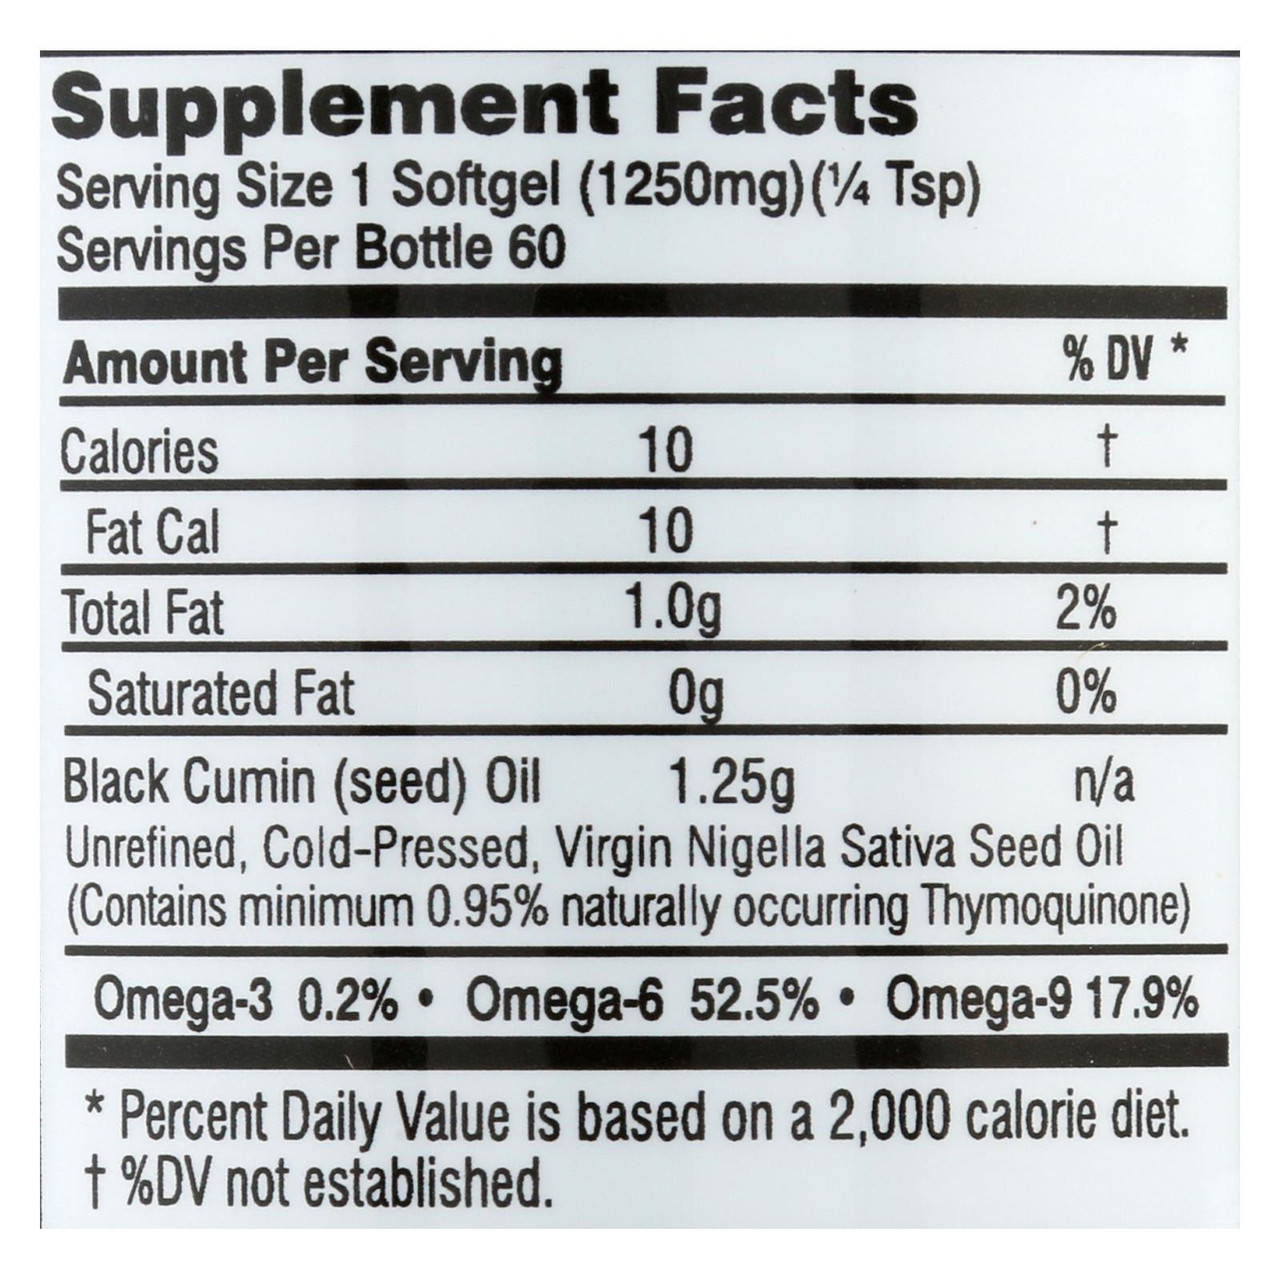 Premium Black Seed Oil - 100% Pure Cold-Pressed - 1,250 MG (60 Softgels) by  Amazing Herbs at the Vitamin Shoppe